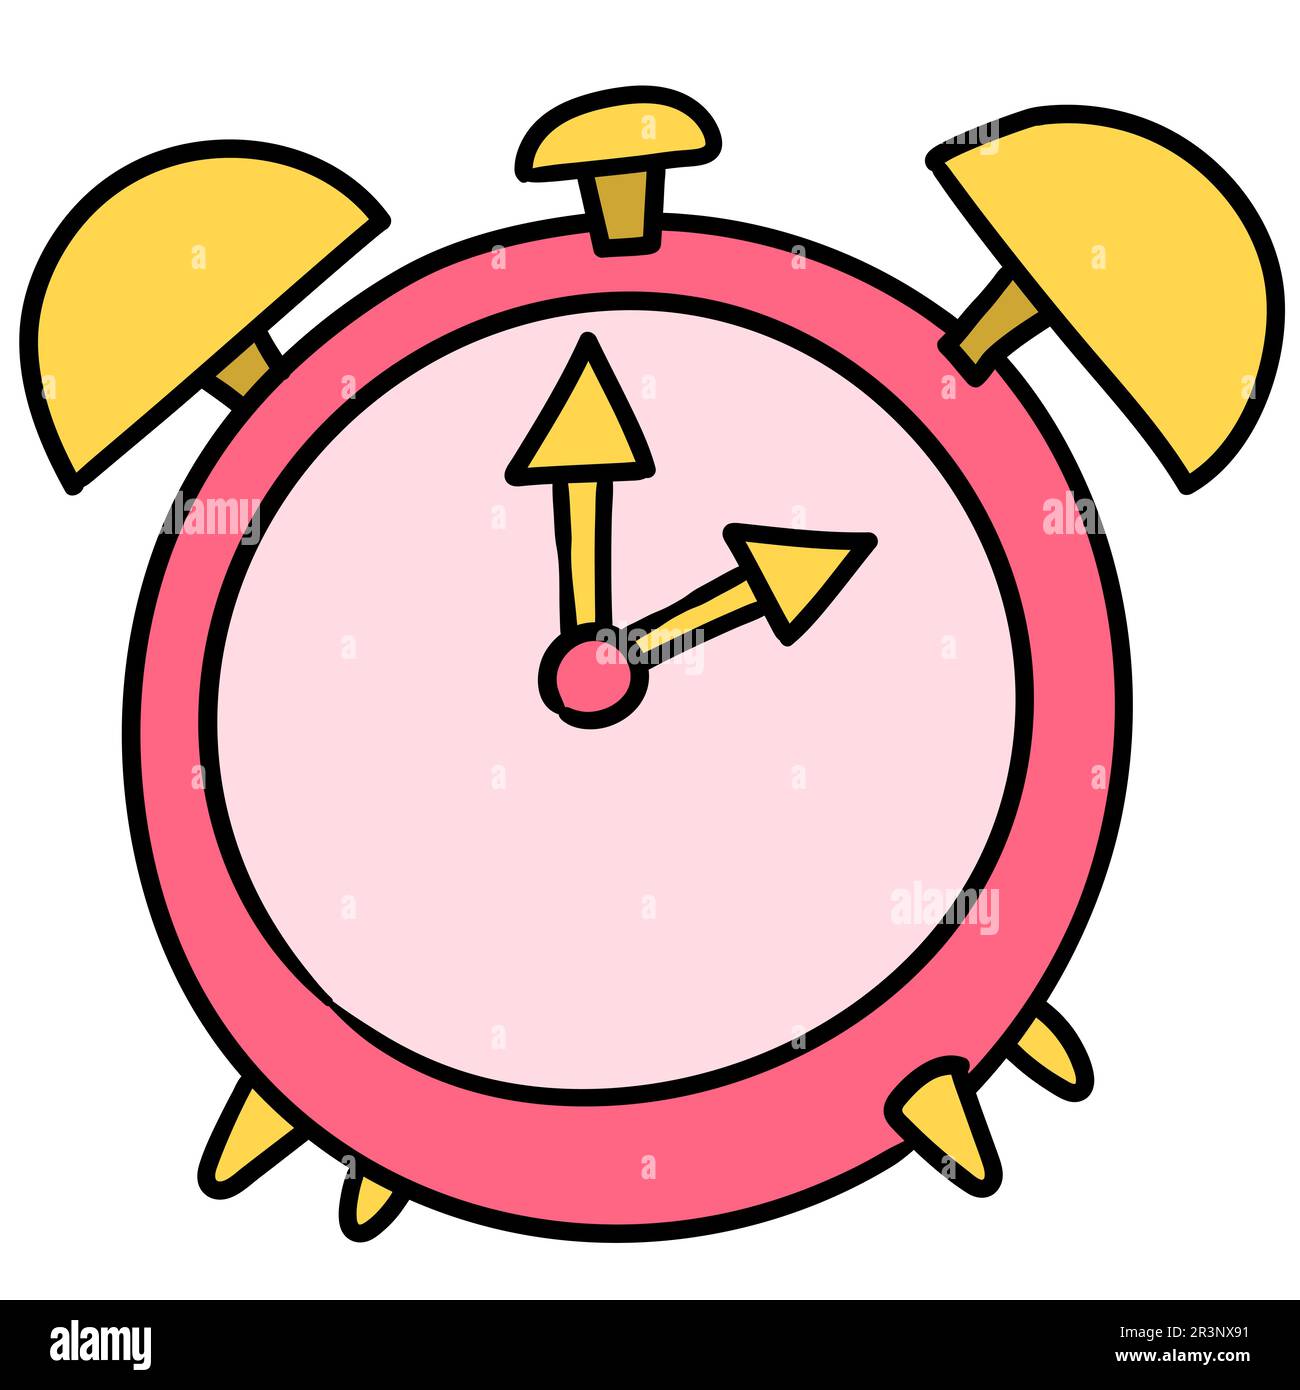 Doodle drawing alarm clock. doodle icon image Stock Photo